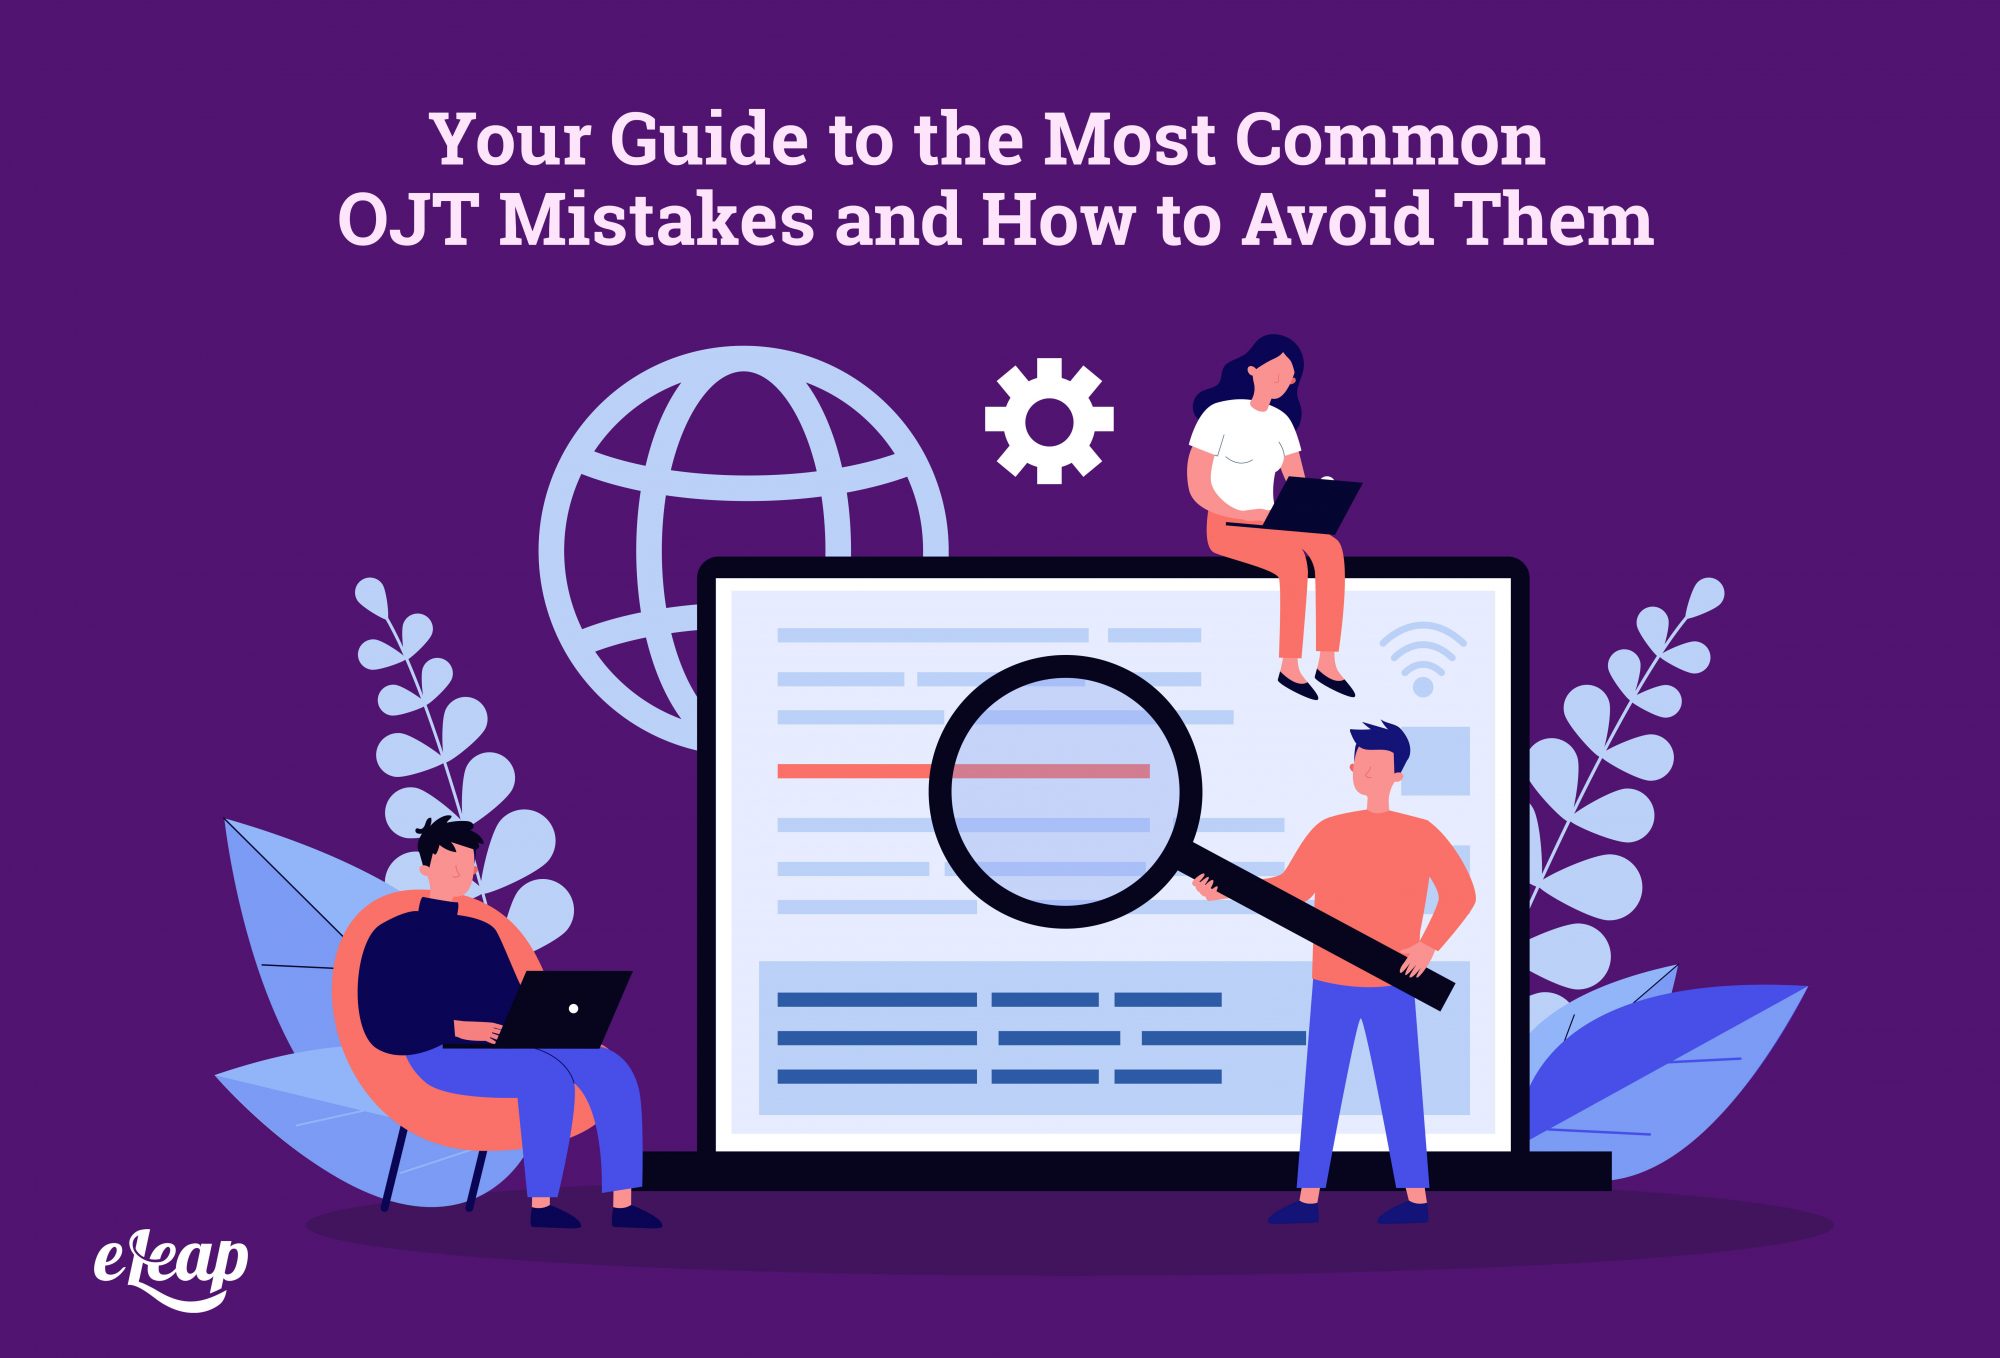 Your Guide to the Most Common OJT Mistakes and How to Avoid Them